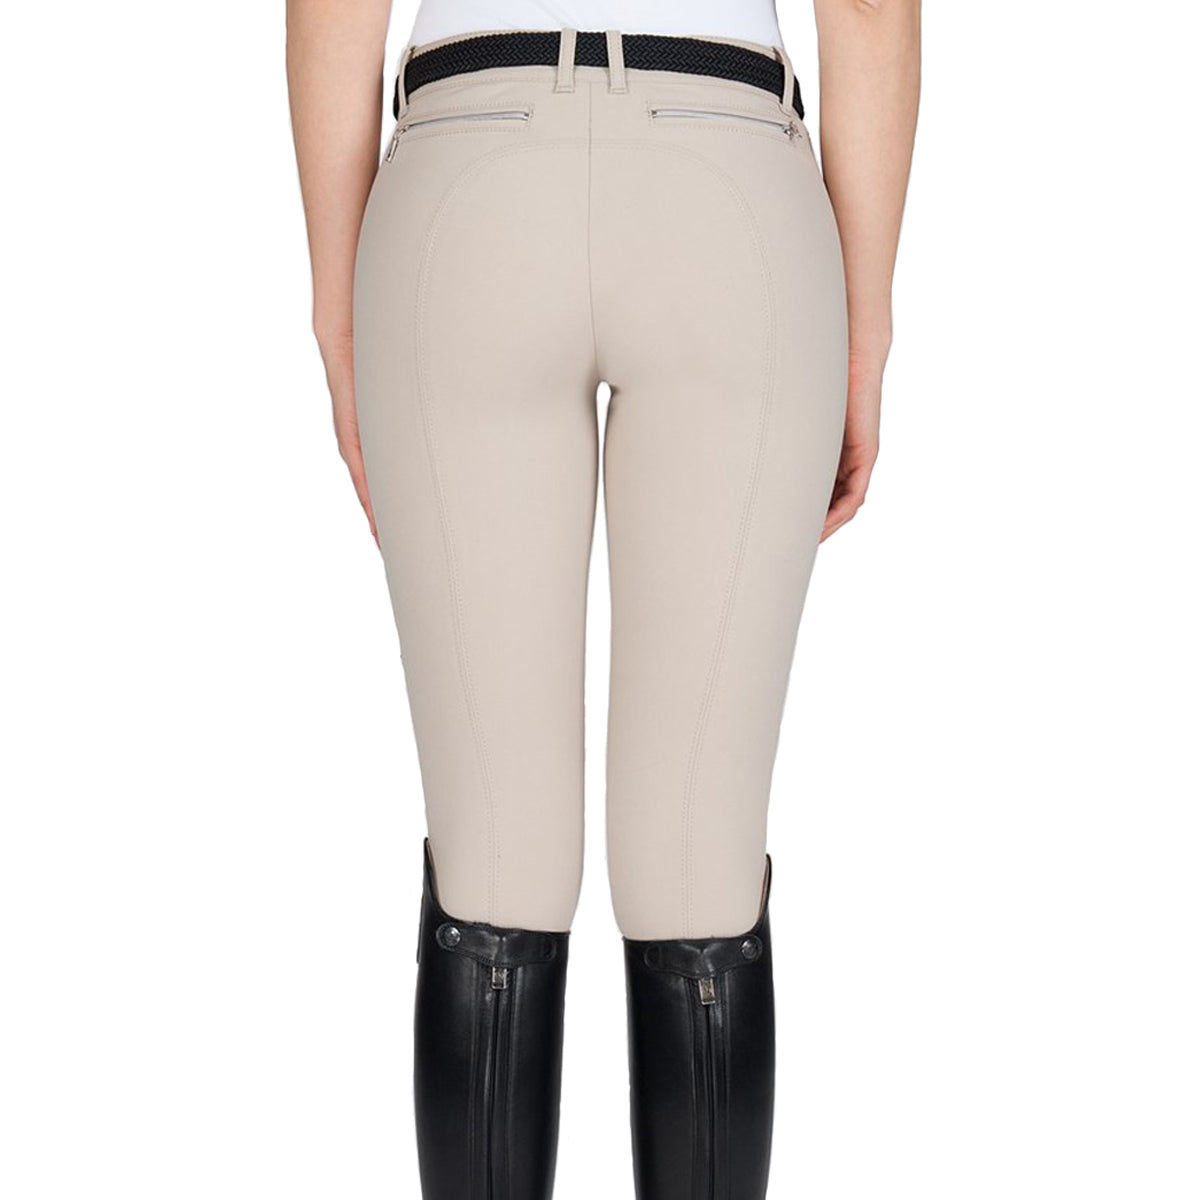 Wholesale Horse Riding Tights Silicone Full Seat Equestrian Breeches -  China Customize Breeches and Equestrian price